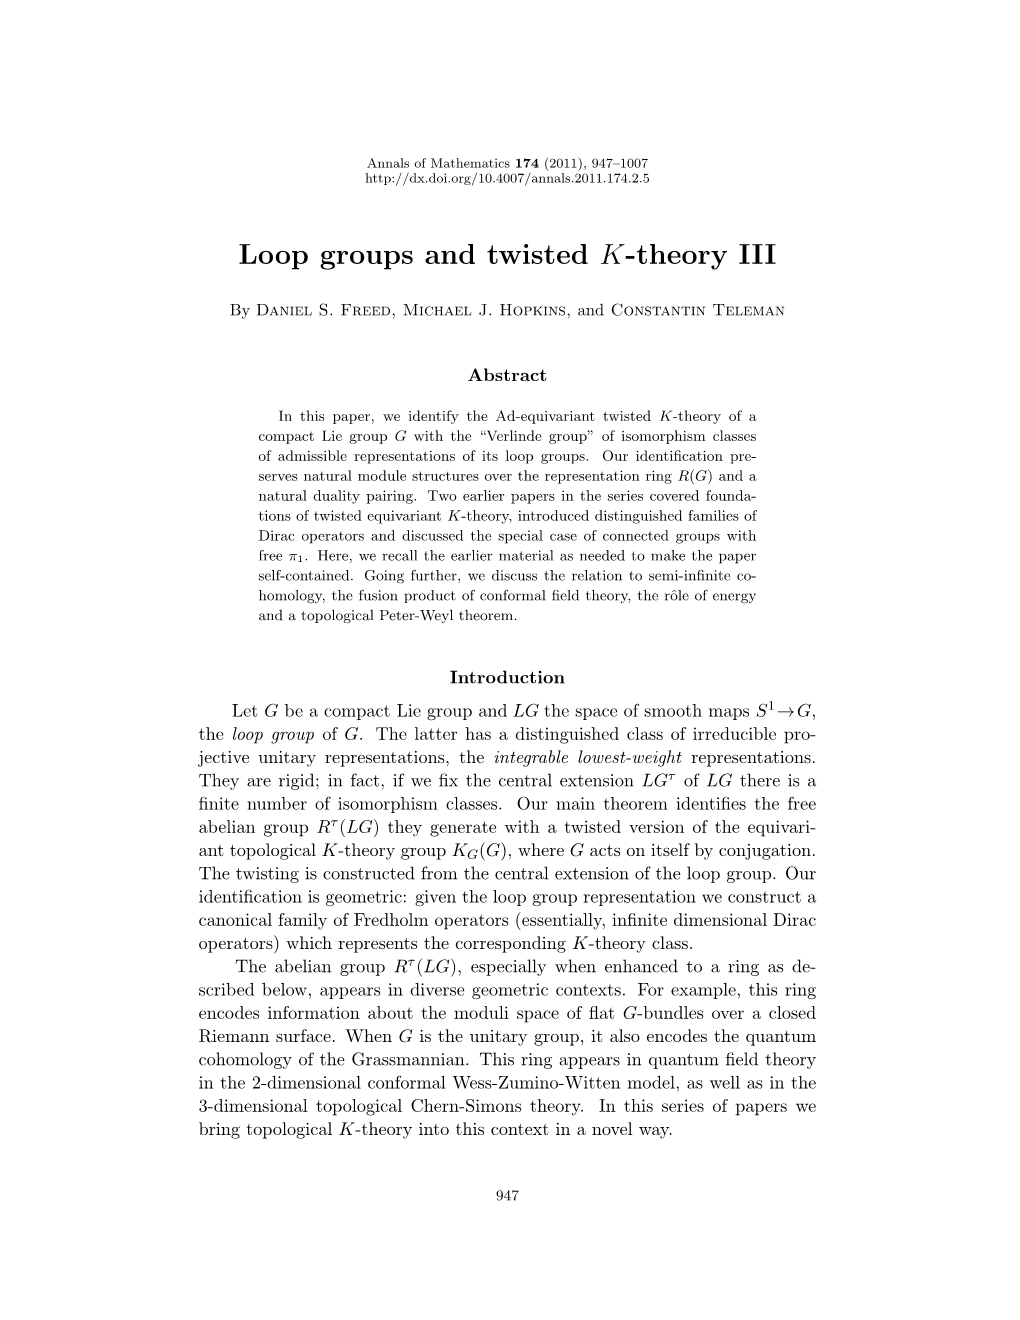 Loop Groups and Twisted K-Theory III